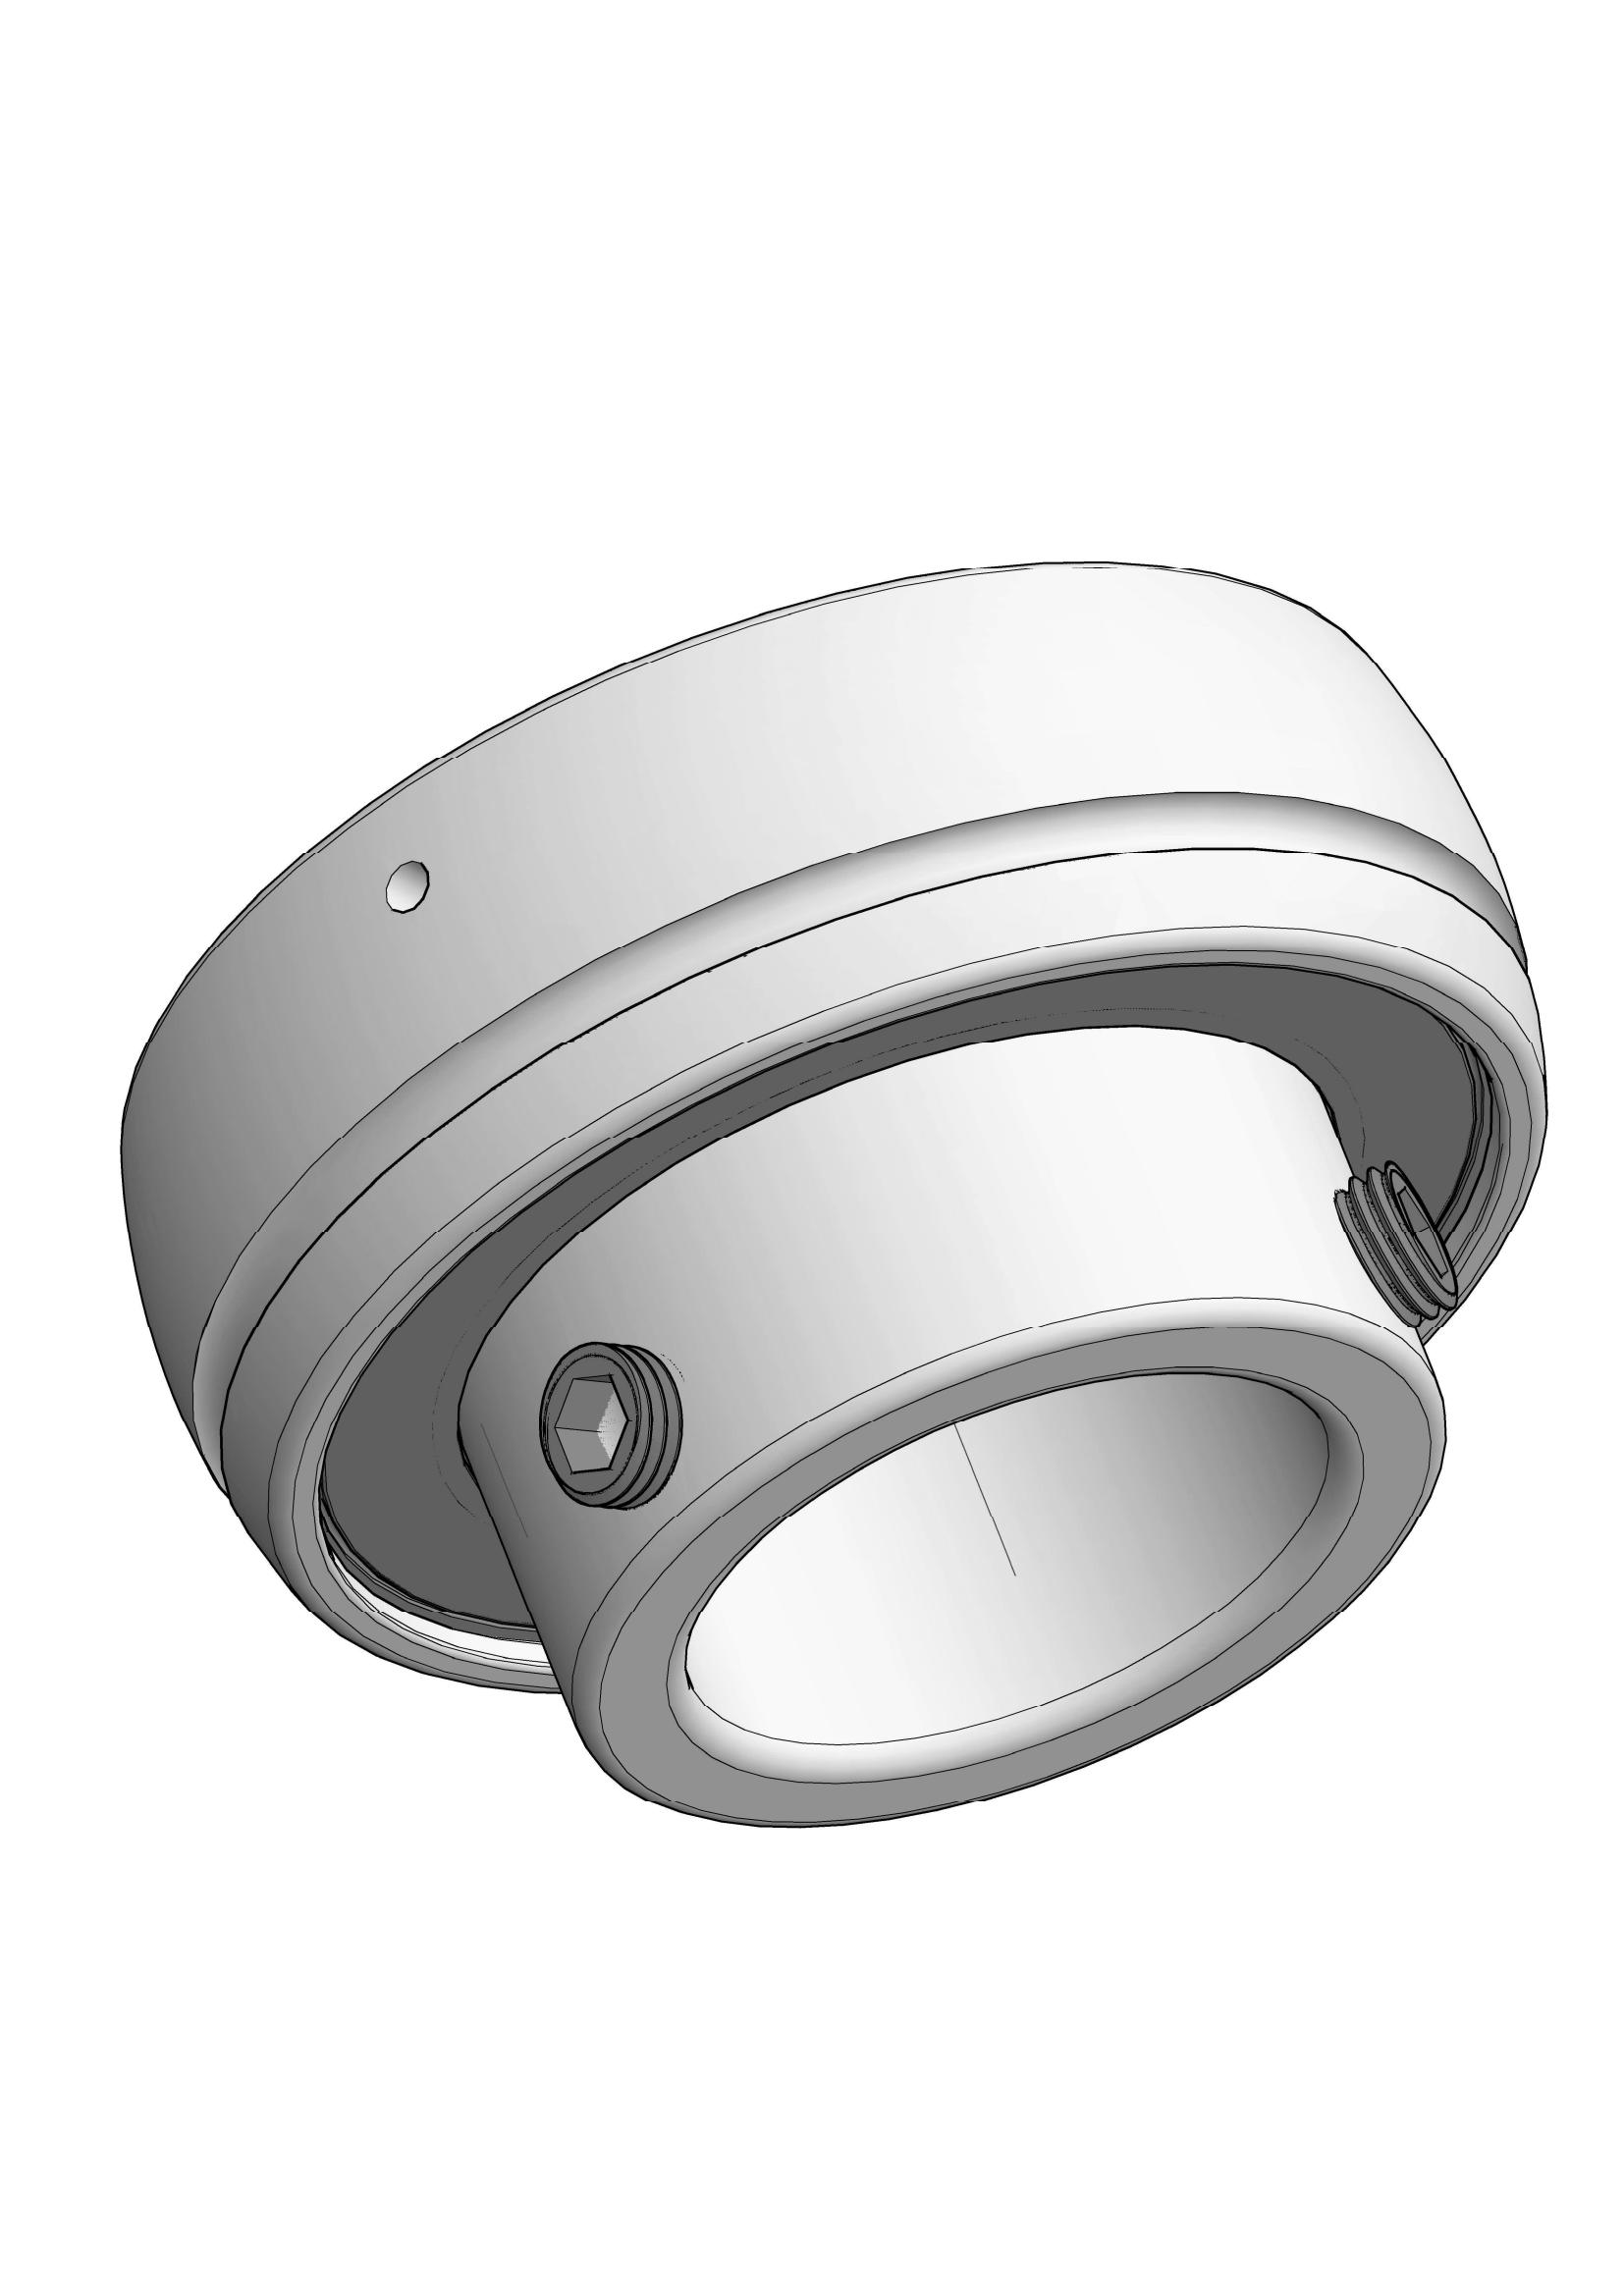 SB207-22 insert ball bearings with Eccentric Collar Lock with 1-3/8 inch Bore